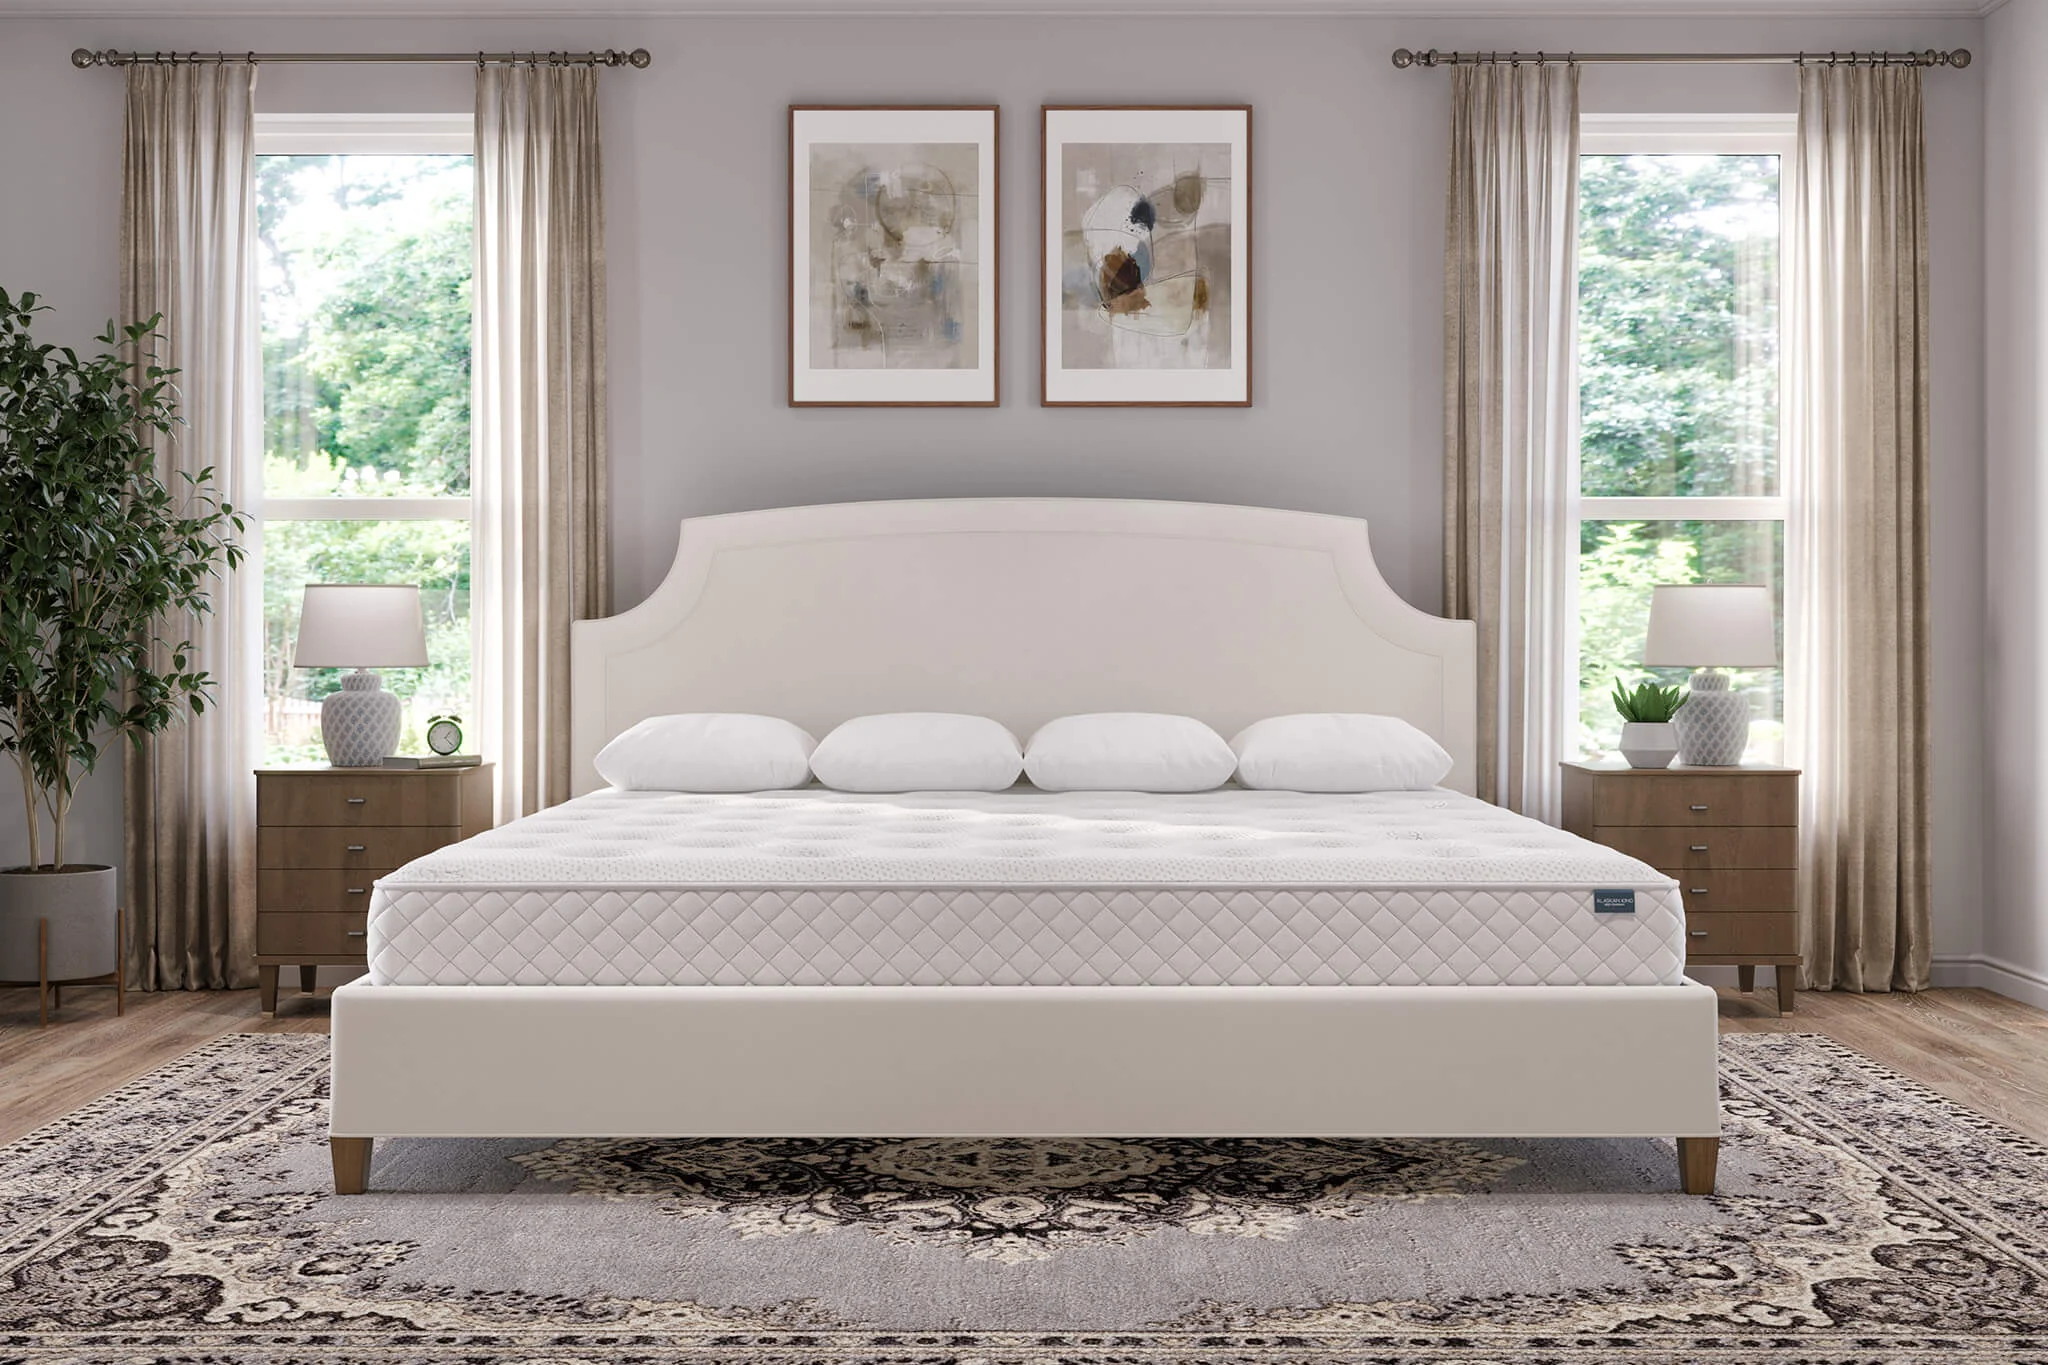 Why King Mattresses Provide the Ultimate Sleeping Experience